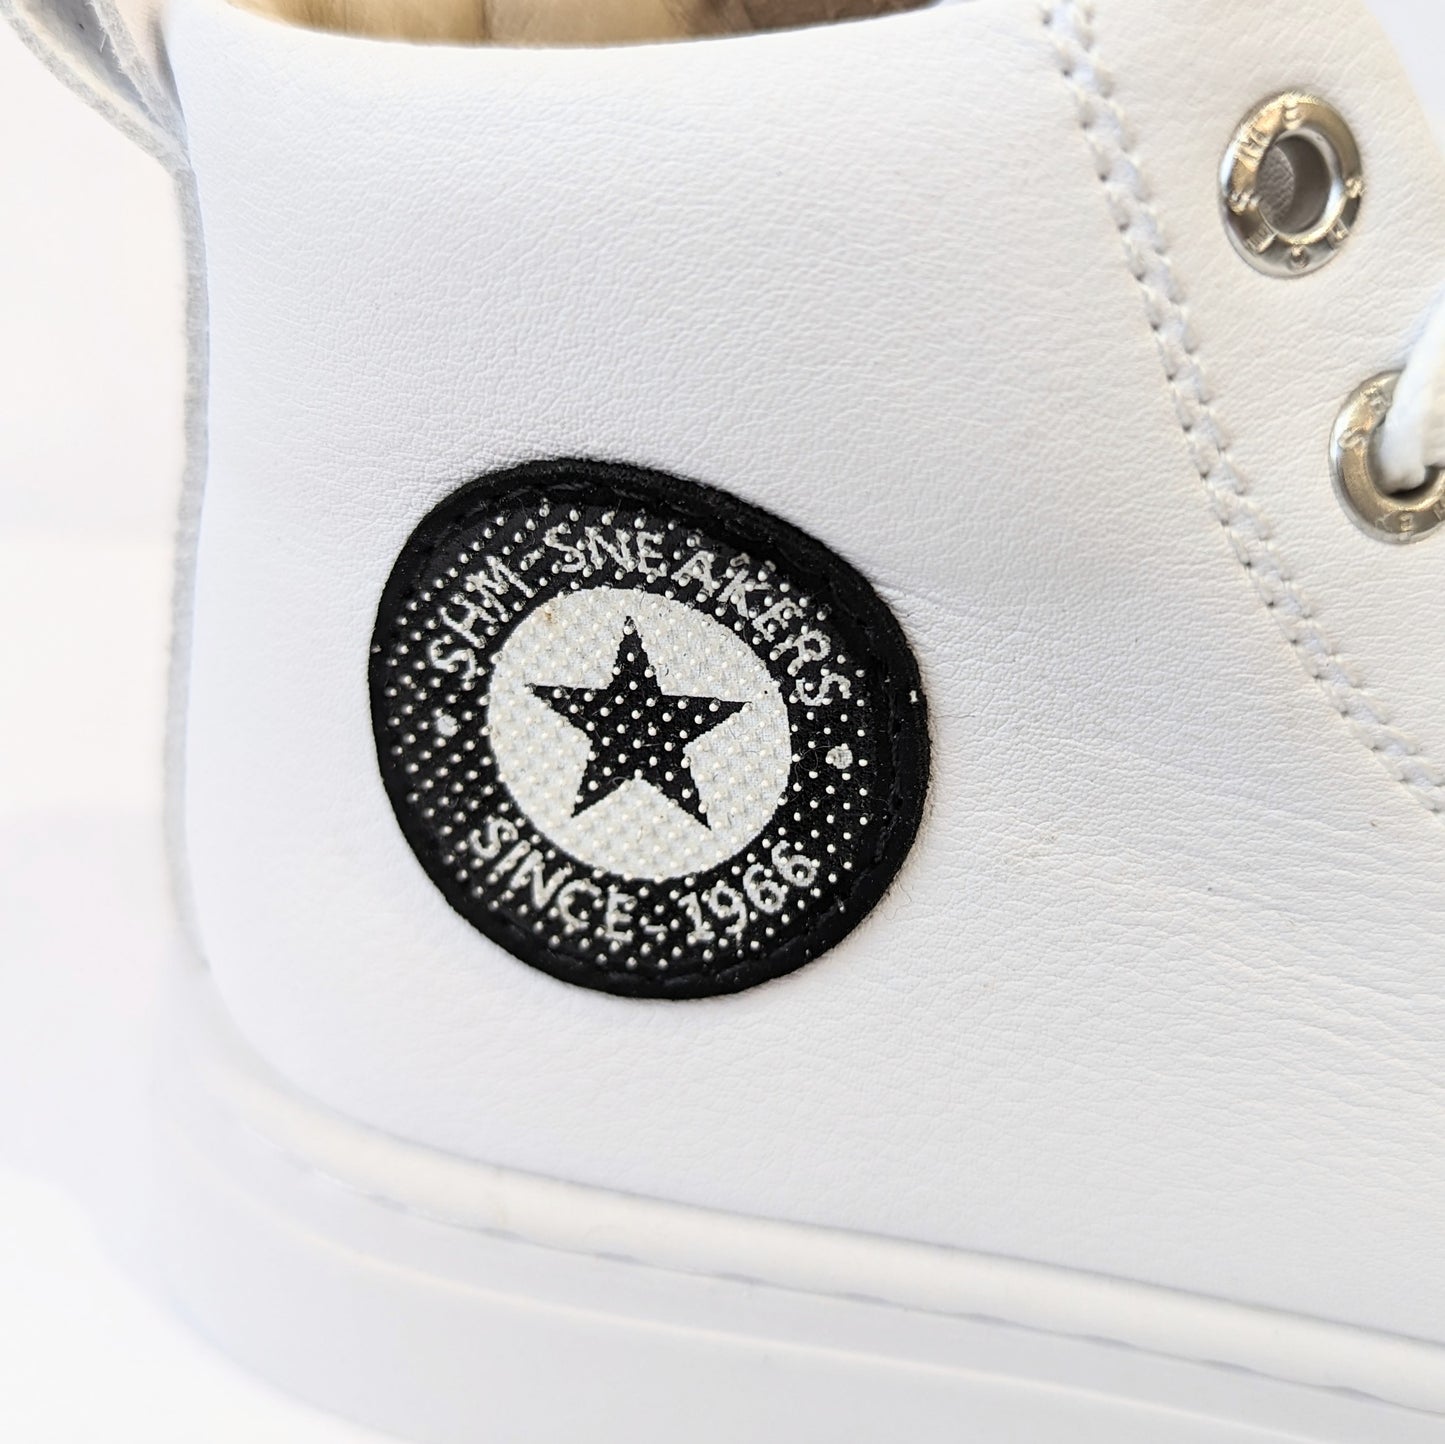 A unisex hi-top by Shoesme, Style SH21S008-F, in white with logo detail, lace/zip up. Close up of black and white logo with star at the centre.